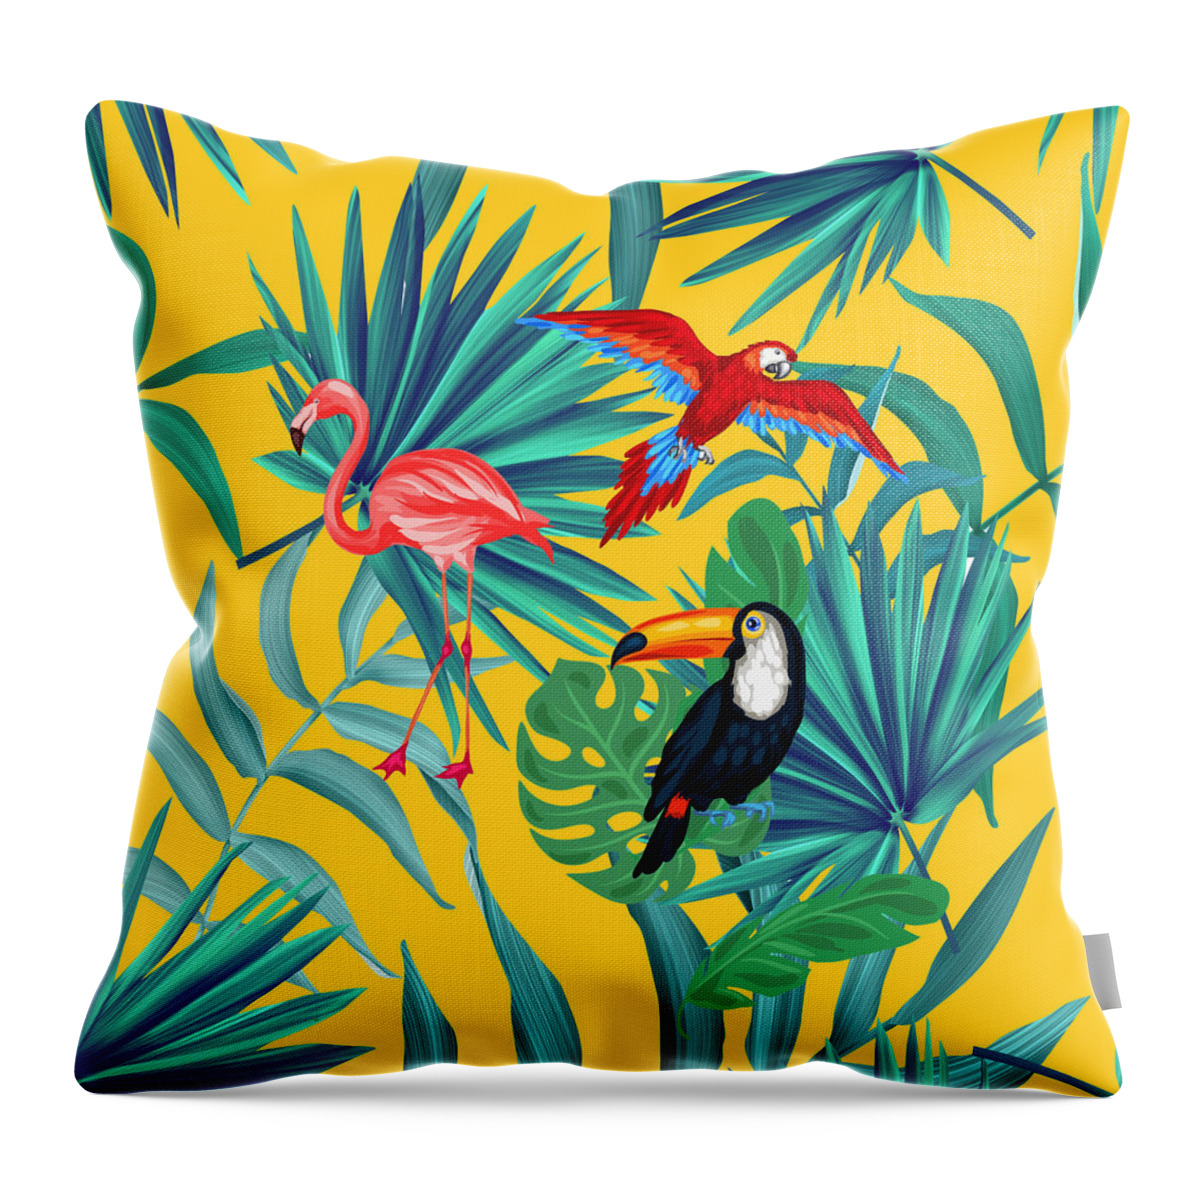 Parrot Throw Pillow featuring the digital art Yellow Tropic by Mark Ashkenazi